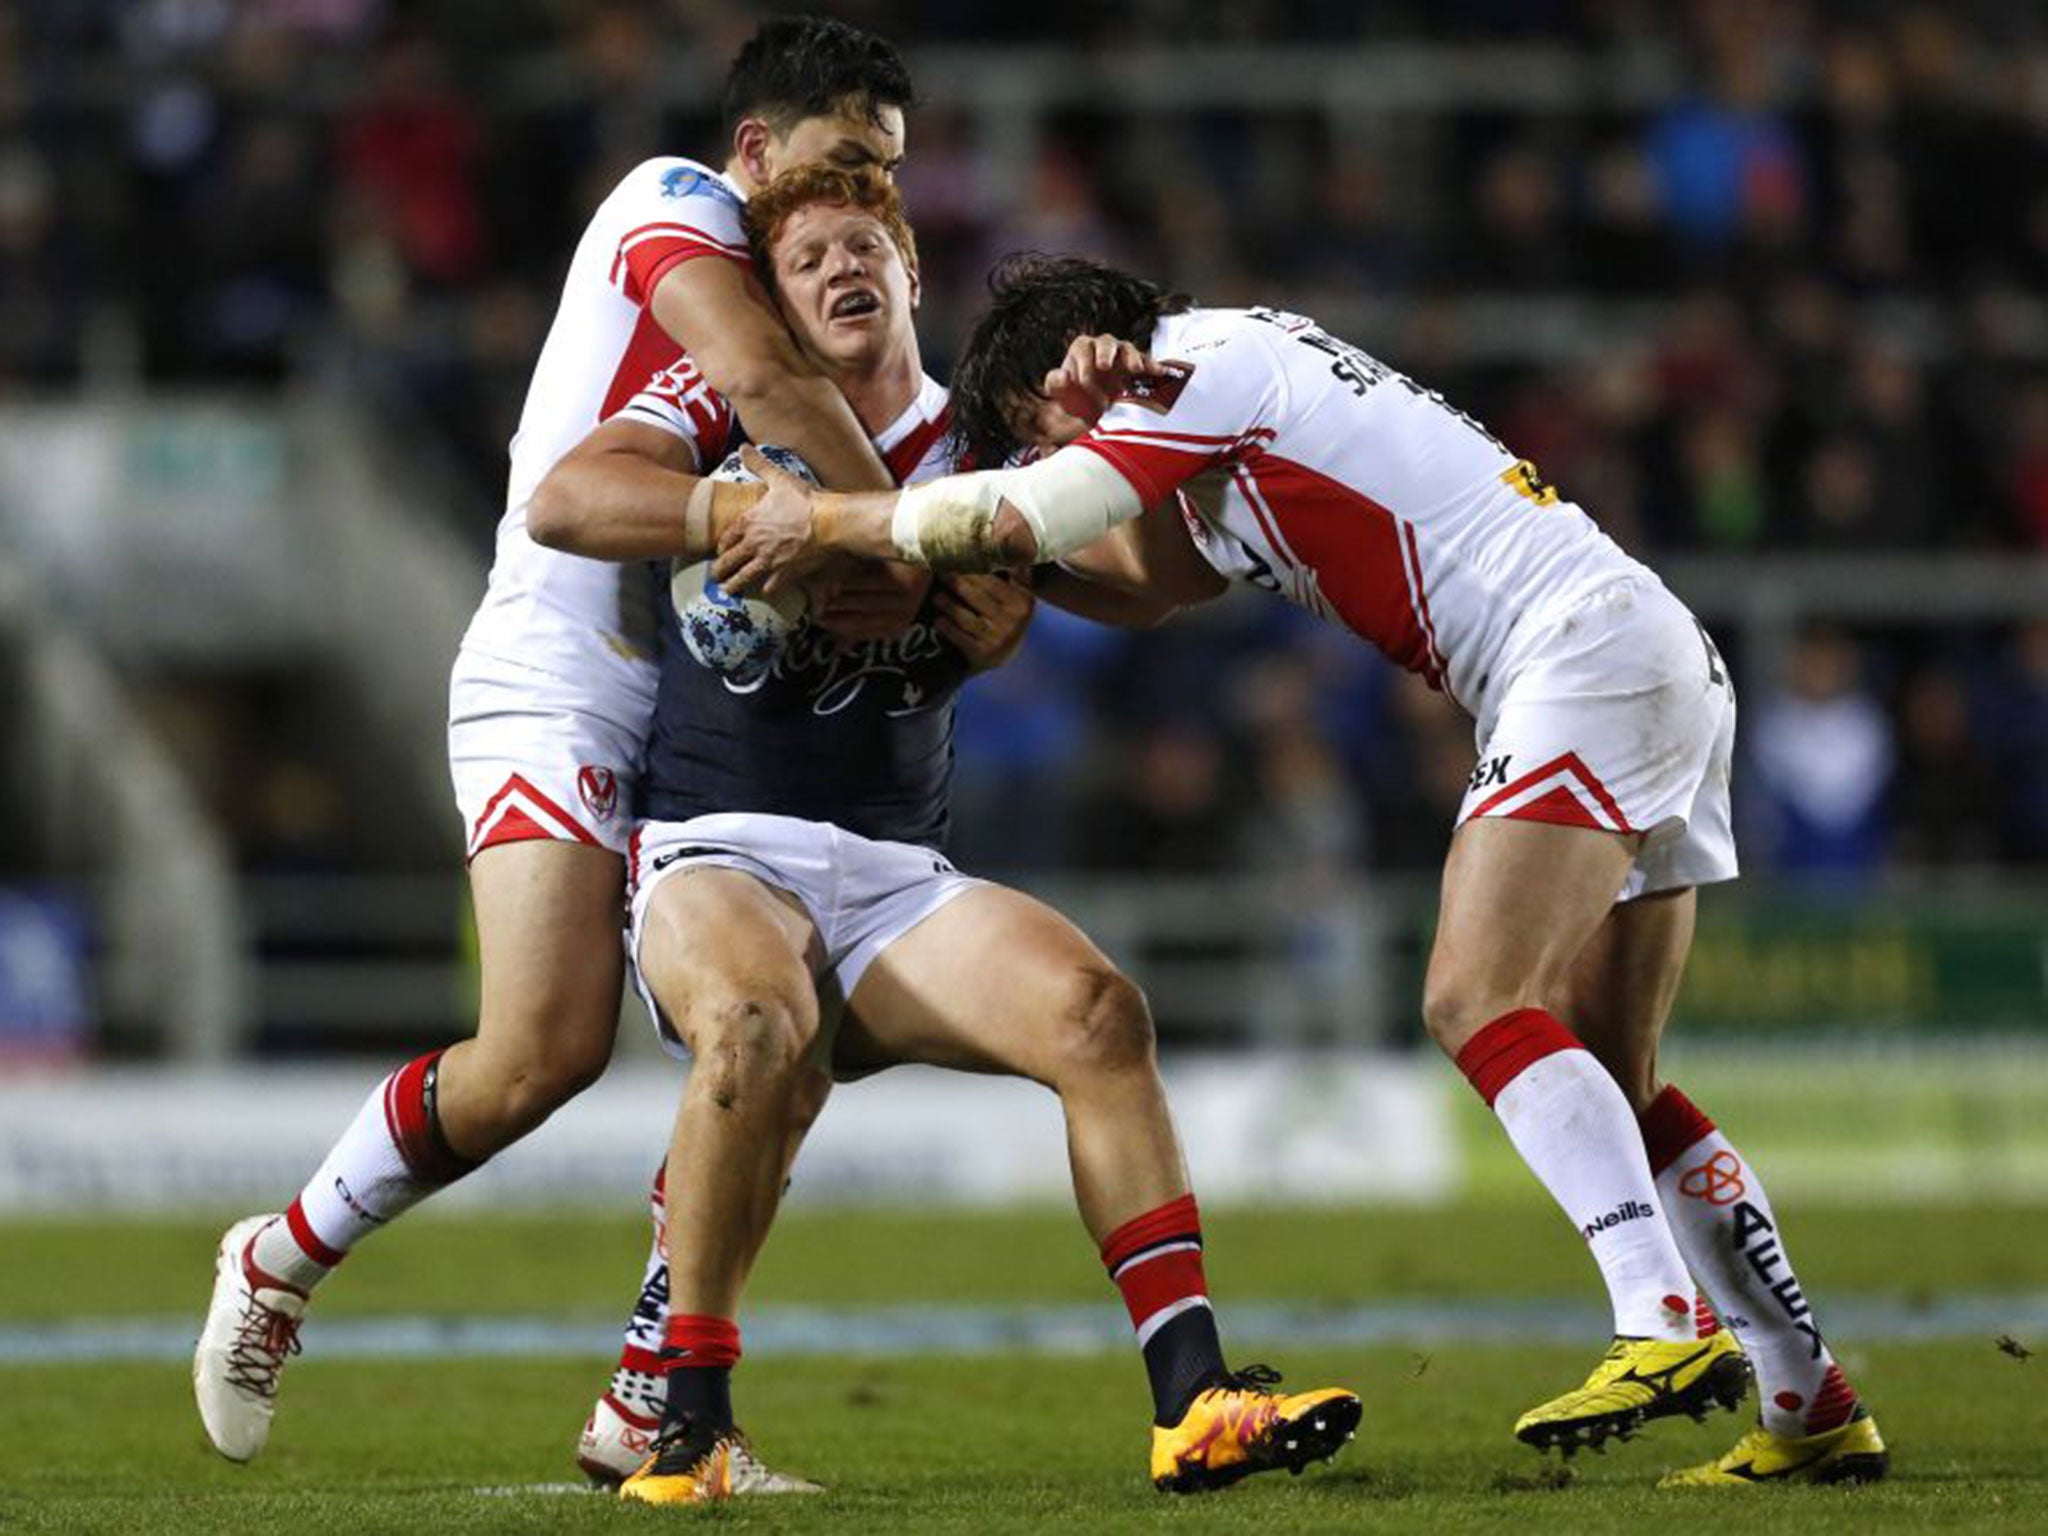 Sydney Roosters’ Dylan Napa is halted by St Helens